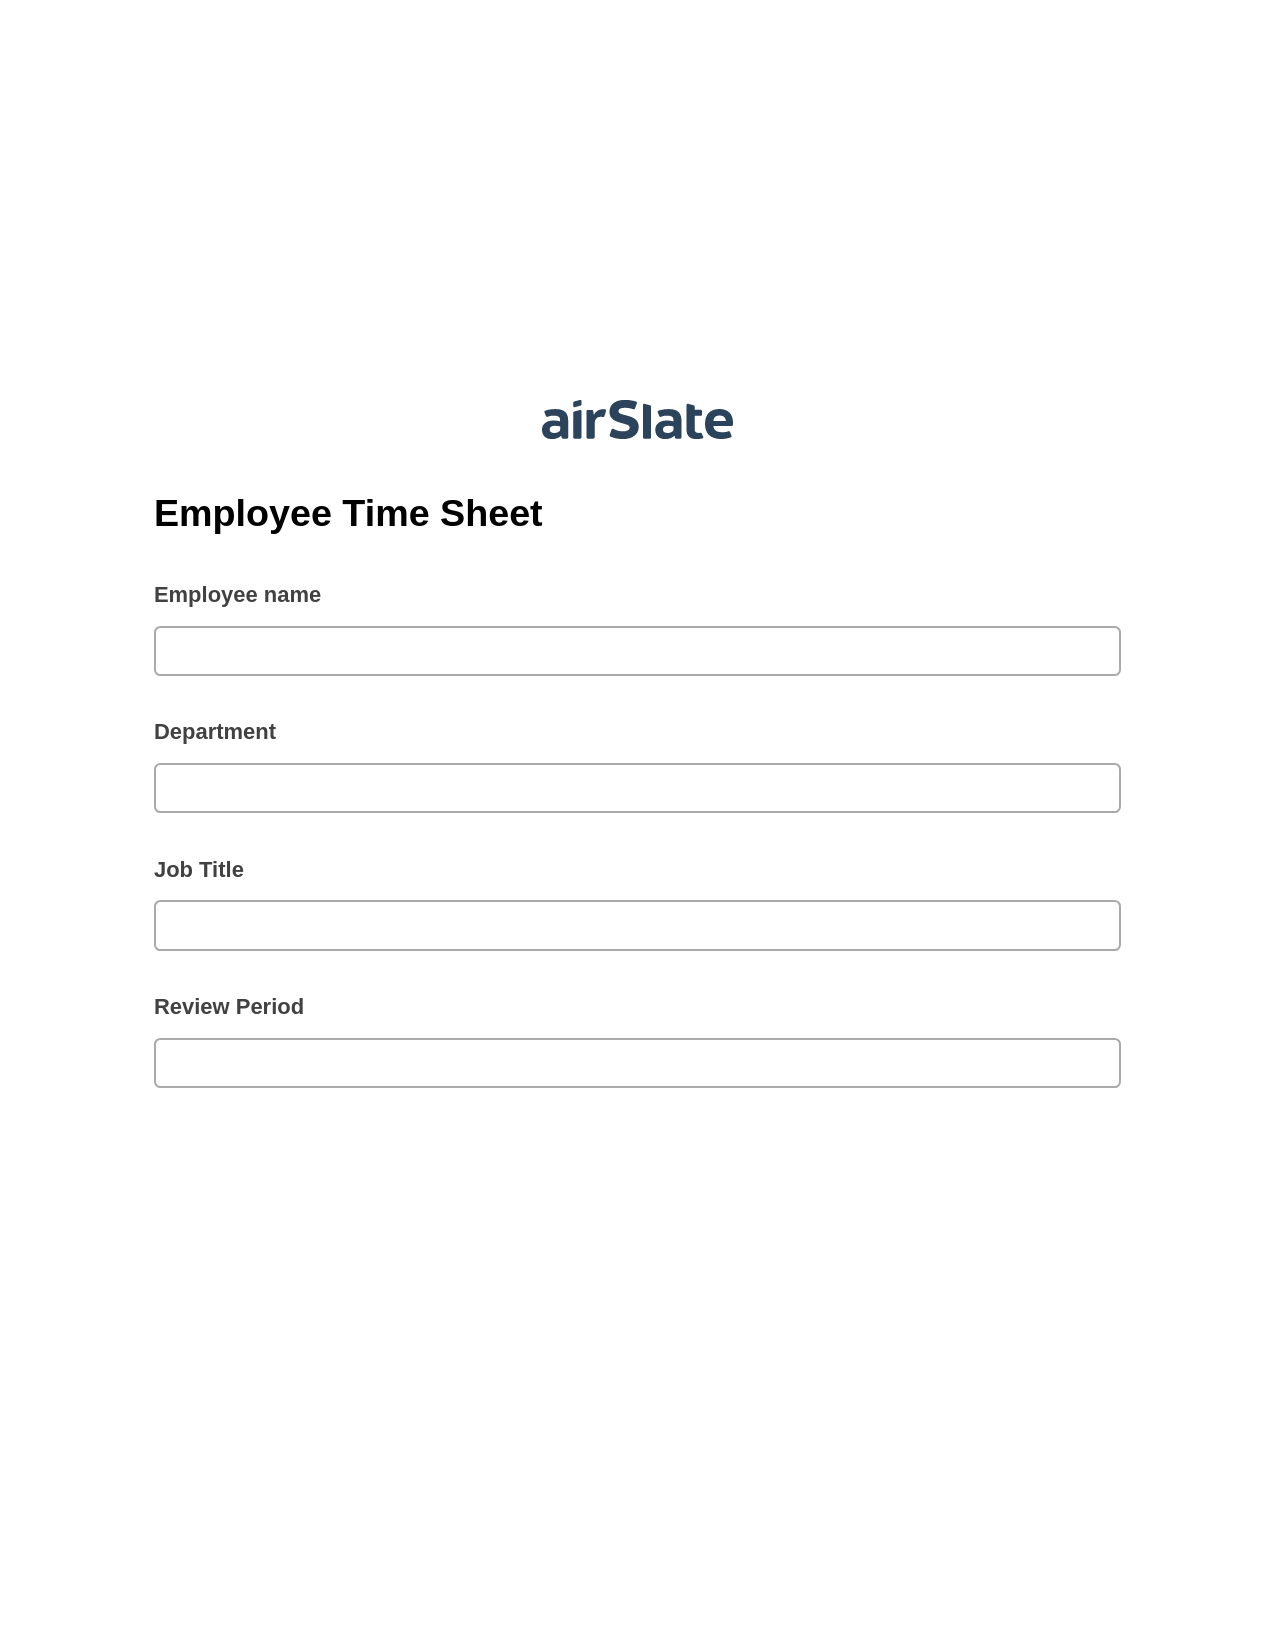 Employee Time Sheet Pre-fill from Excel Spreadsheet Bot, Create Salesforce Records Bot, Slack Two-Way Binding Bot